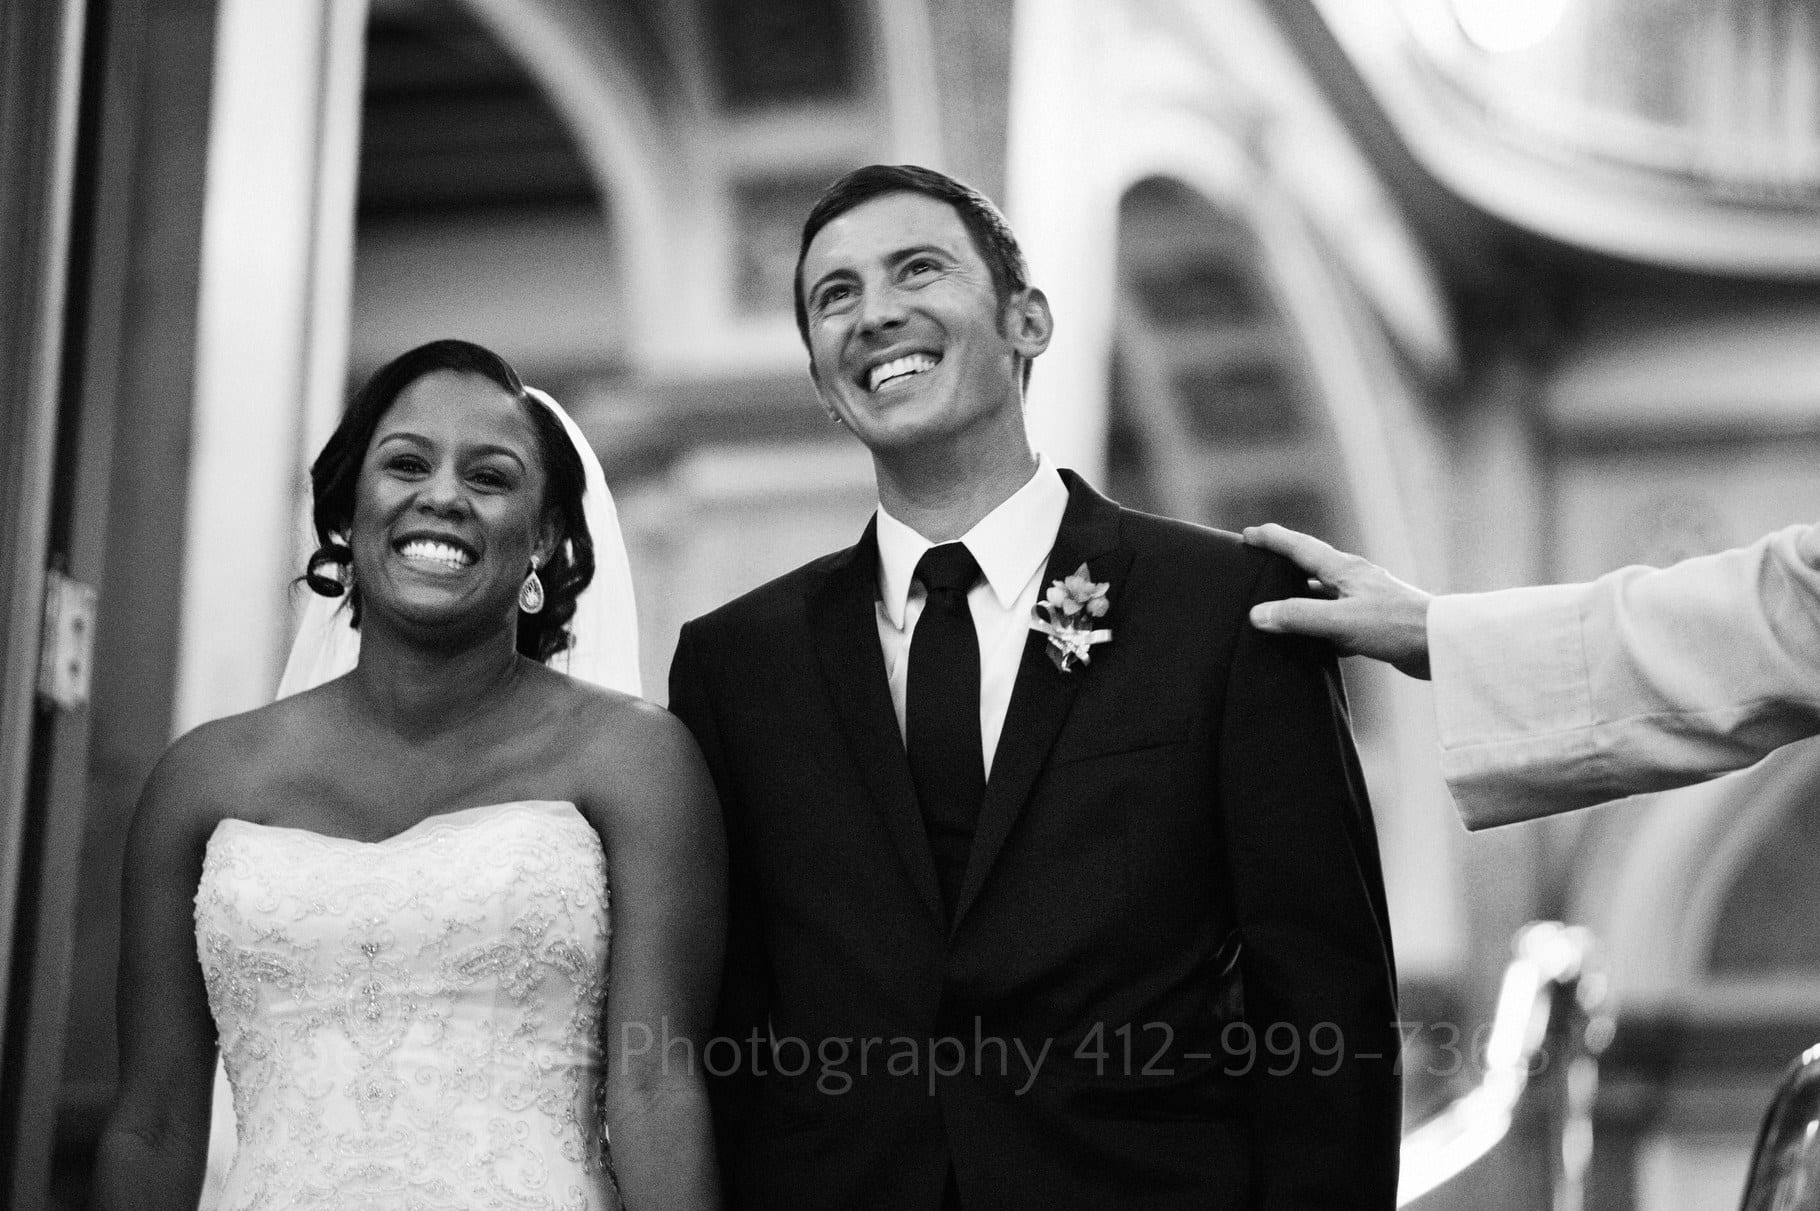 Bride and groom smile as they turn to look at their guests from atop a grand staircase. The reverend's hand is resting on the groom's shoulder.